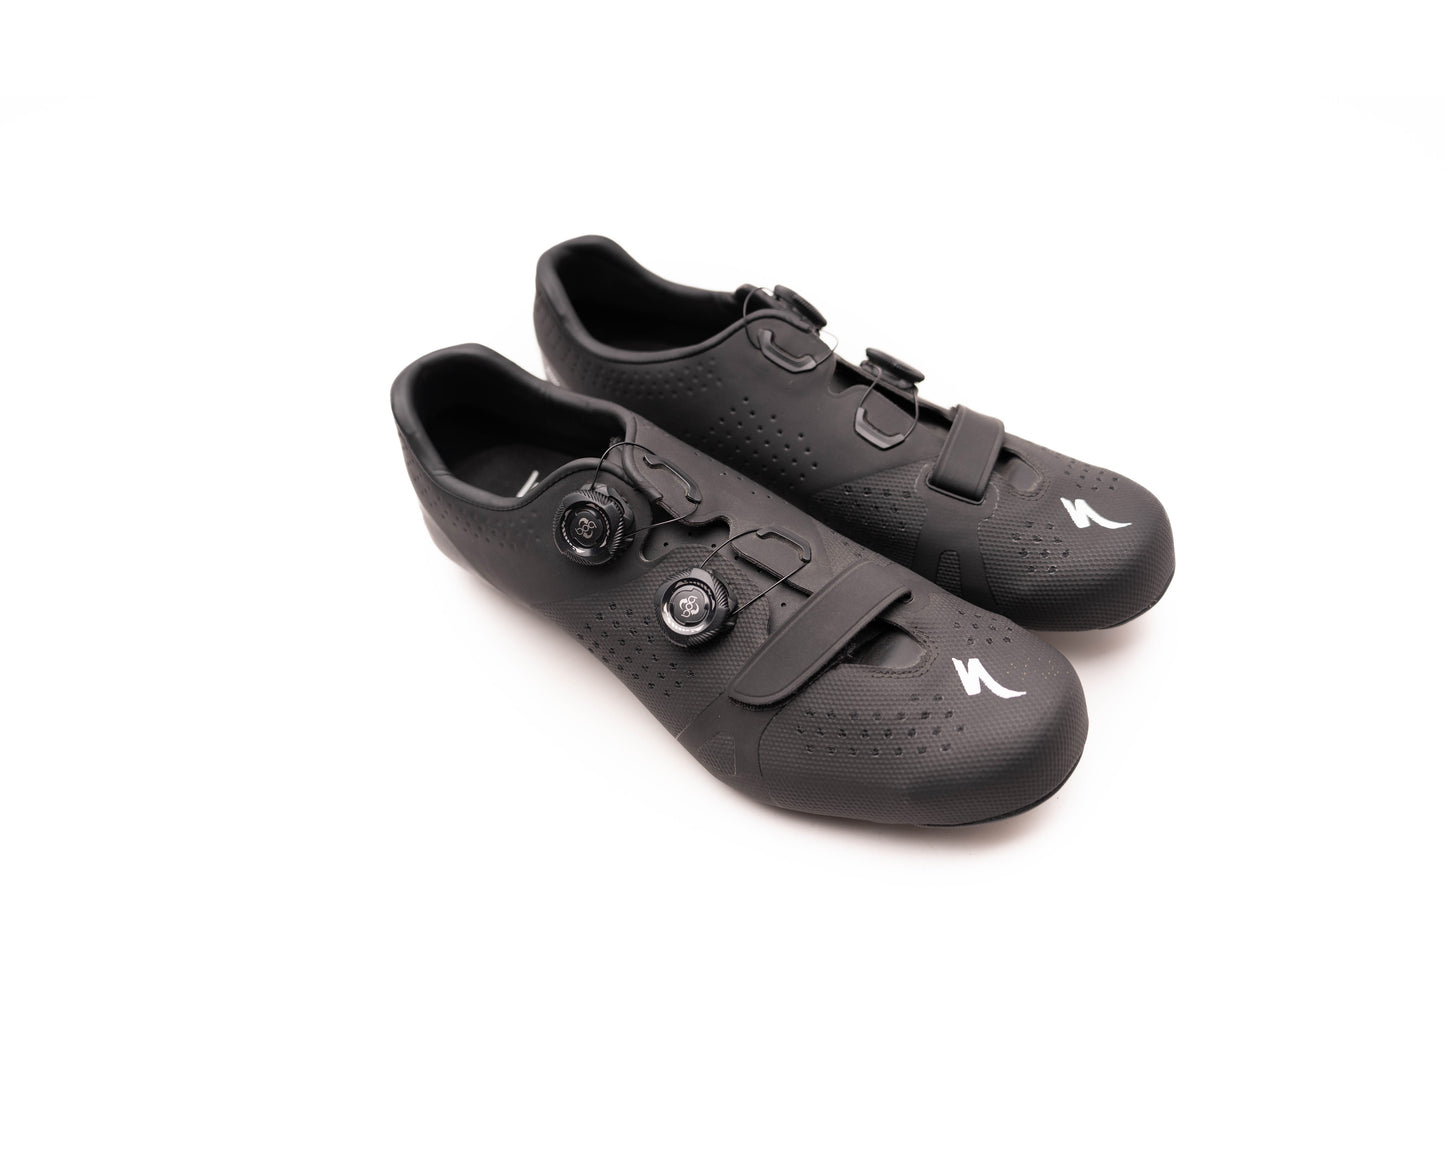 Specialized Torch 3.0 Road Shoe Blk 46.5 (New Other)